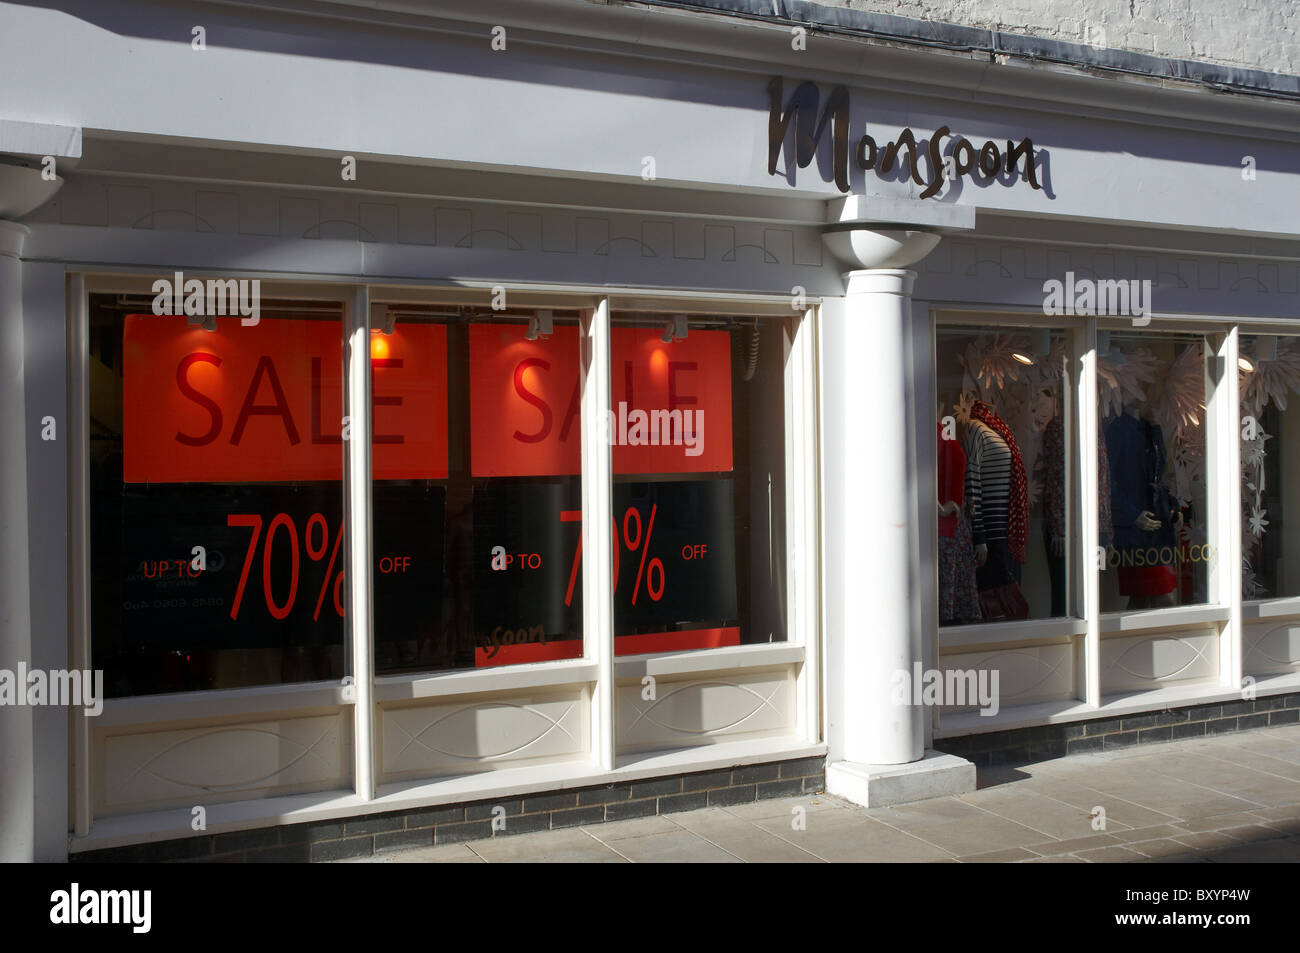 Monsoon shop fronts in Winchester, Hampshire, England showing the Monsoon logo and sale posters, January 2011. Stock Photo